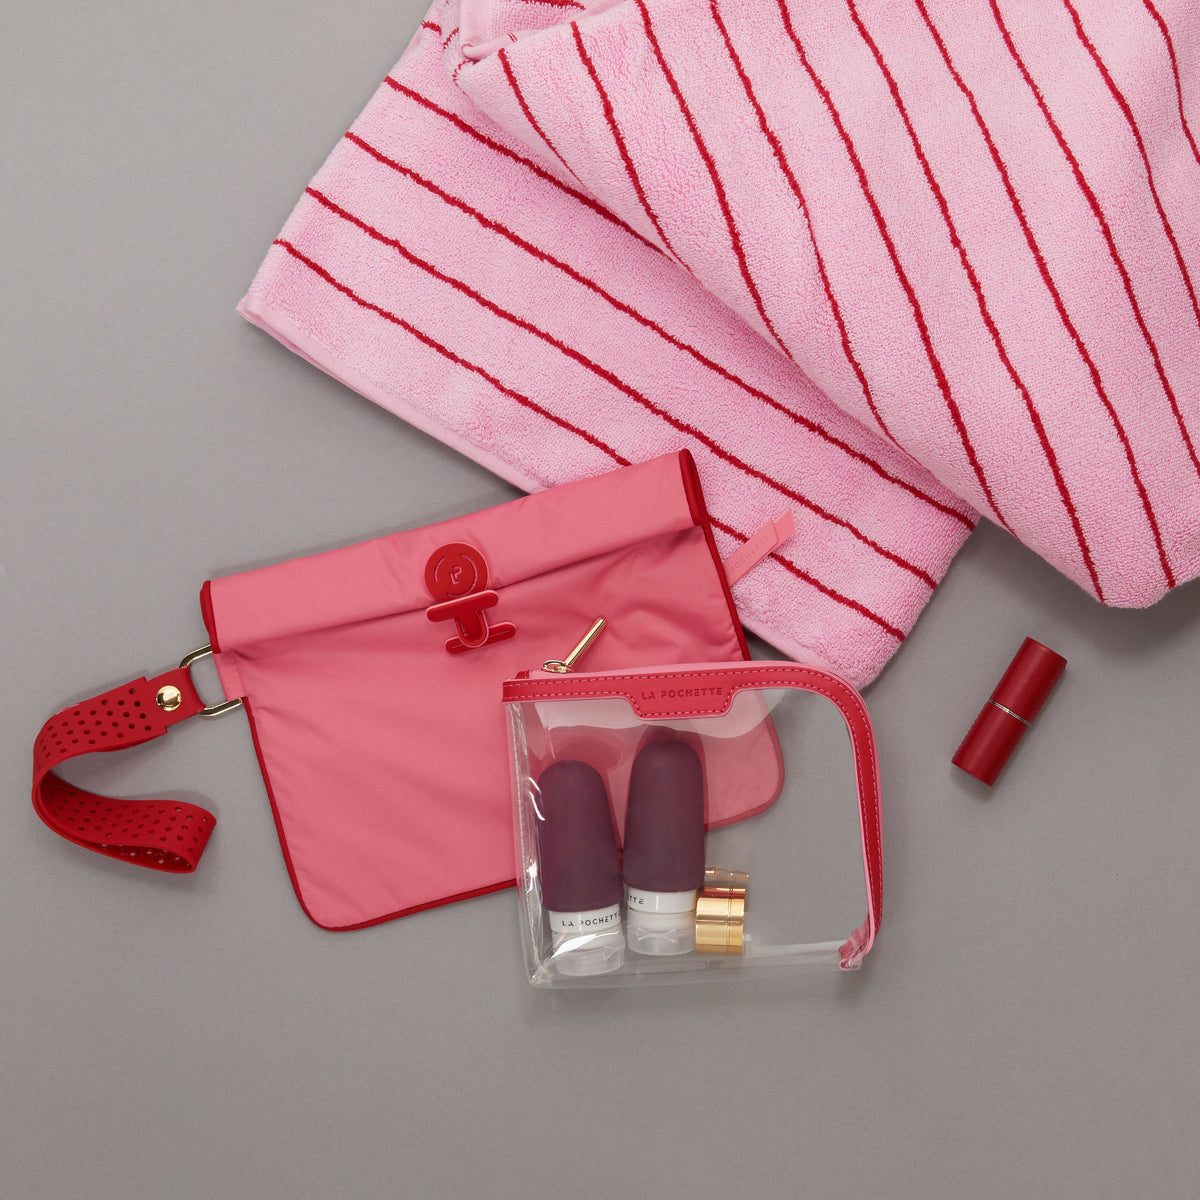 Small wet bag in Peony and Chilli colour way lying flat with a small Anywhere Everywhere Pouch containing La Pochette silicone travel bottles, a lipstick, and beach towel